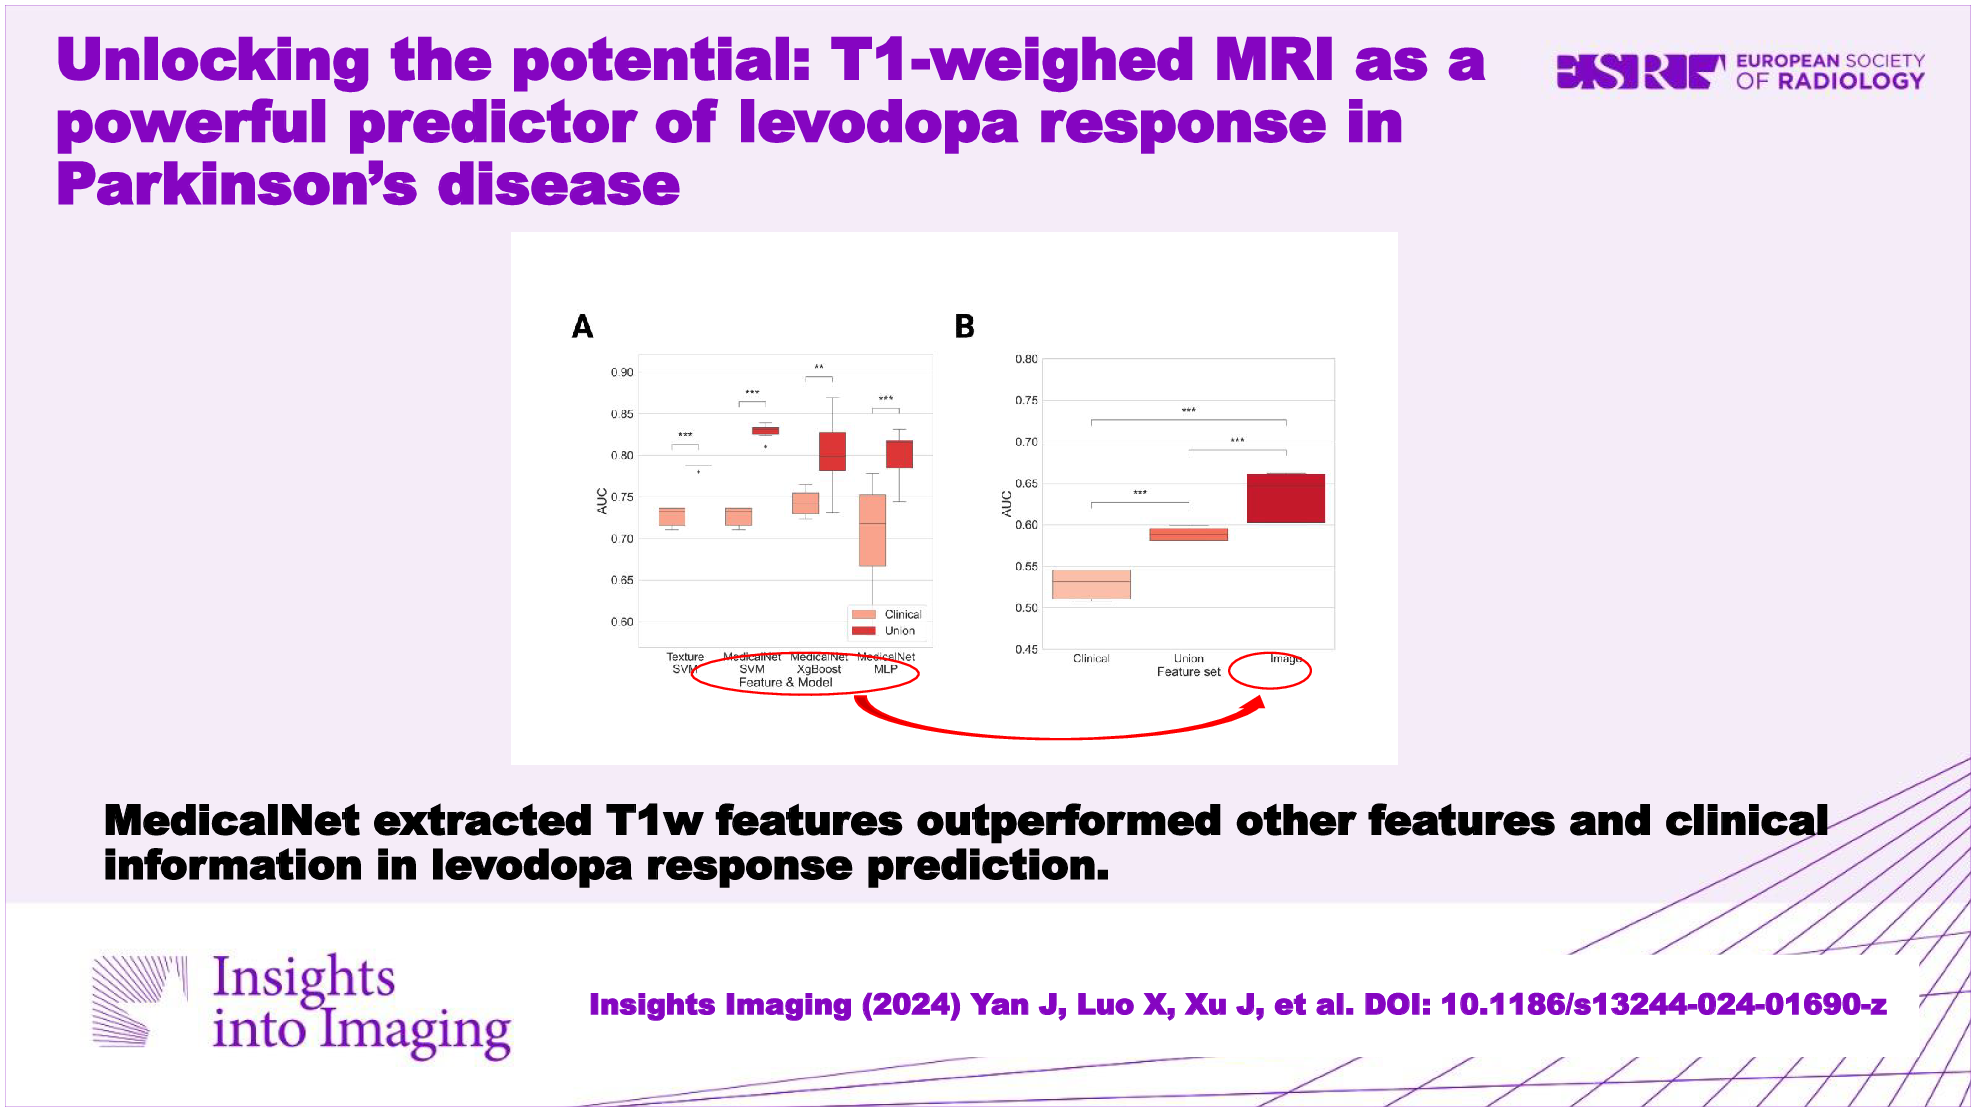 Unlocking the potential: T1-weighed MRI as a powerful predictor of levodopa response in Parkinson’s disease